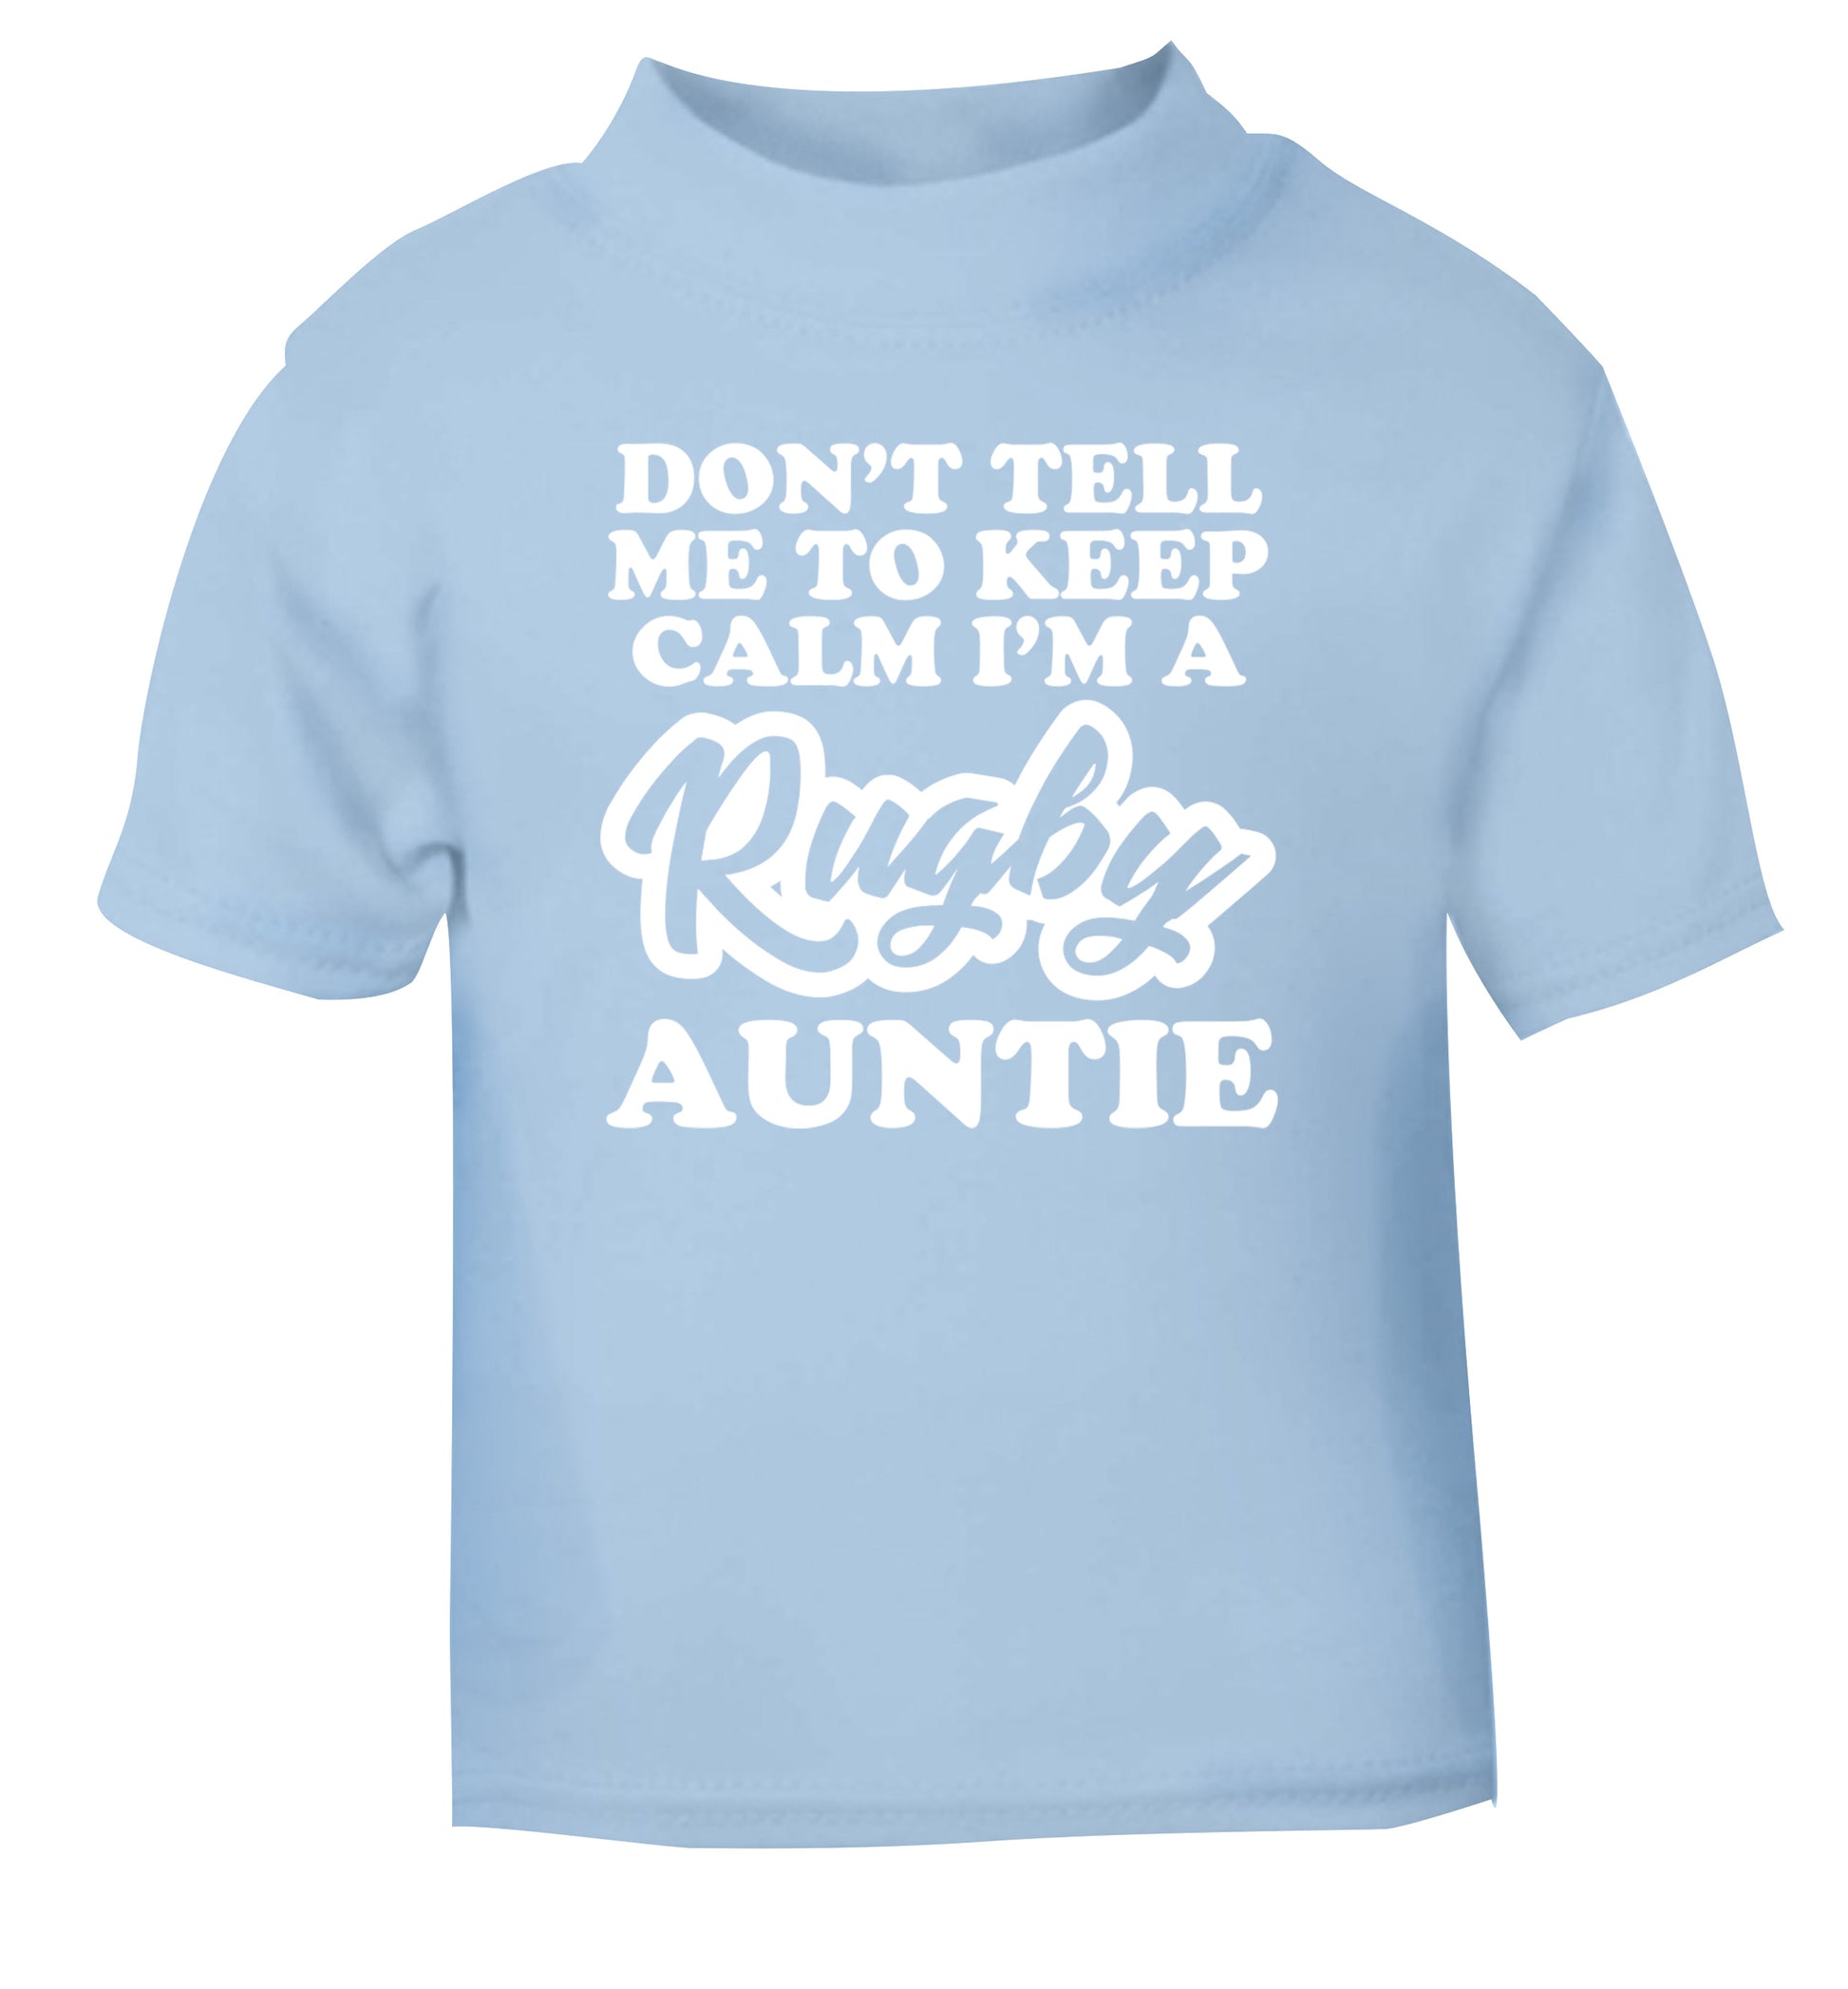 Don't tell me keep calm I'm a rugby auntie light blue Baby Toddler Tshirt 2 Years